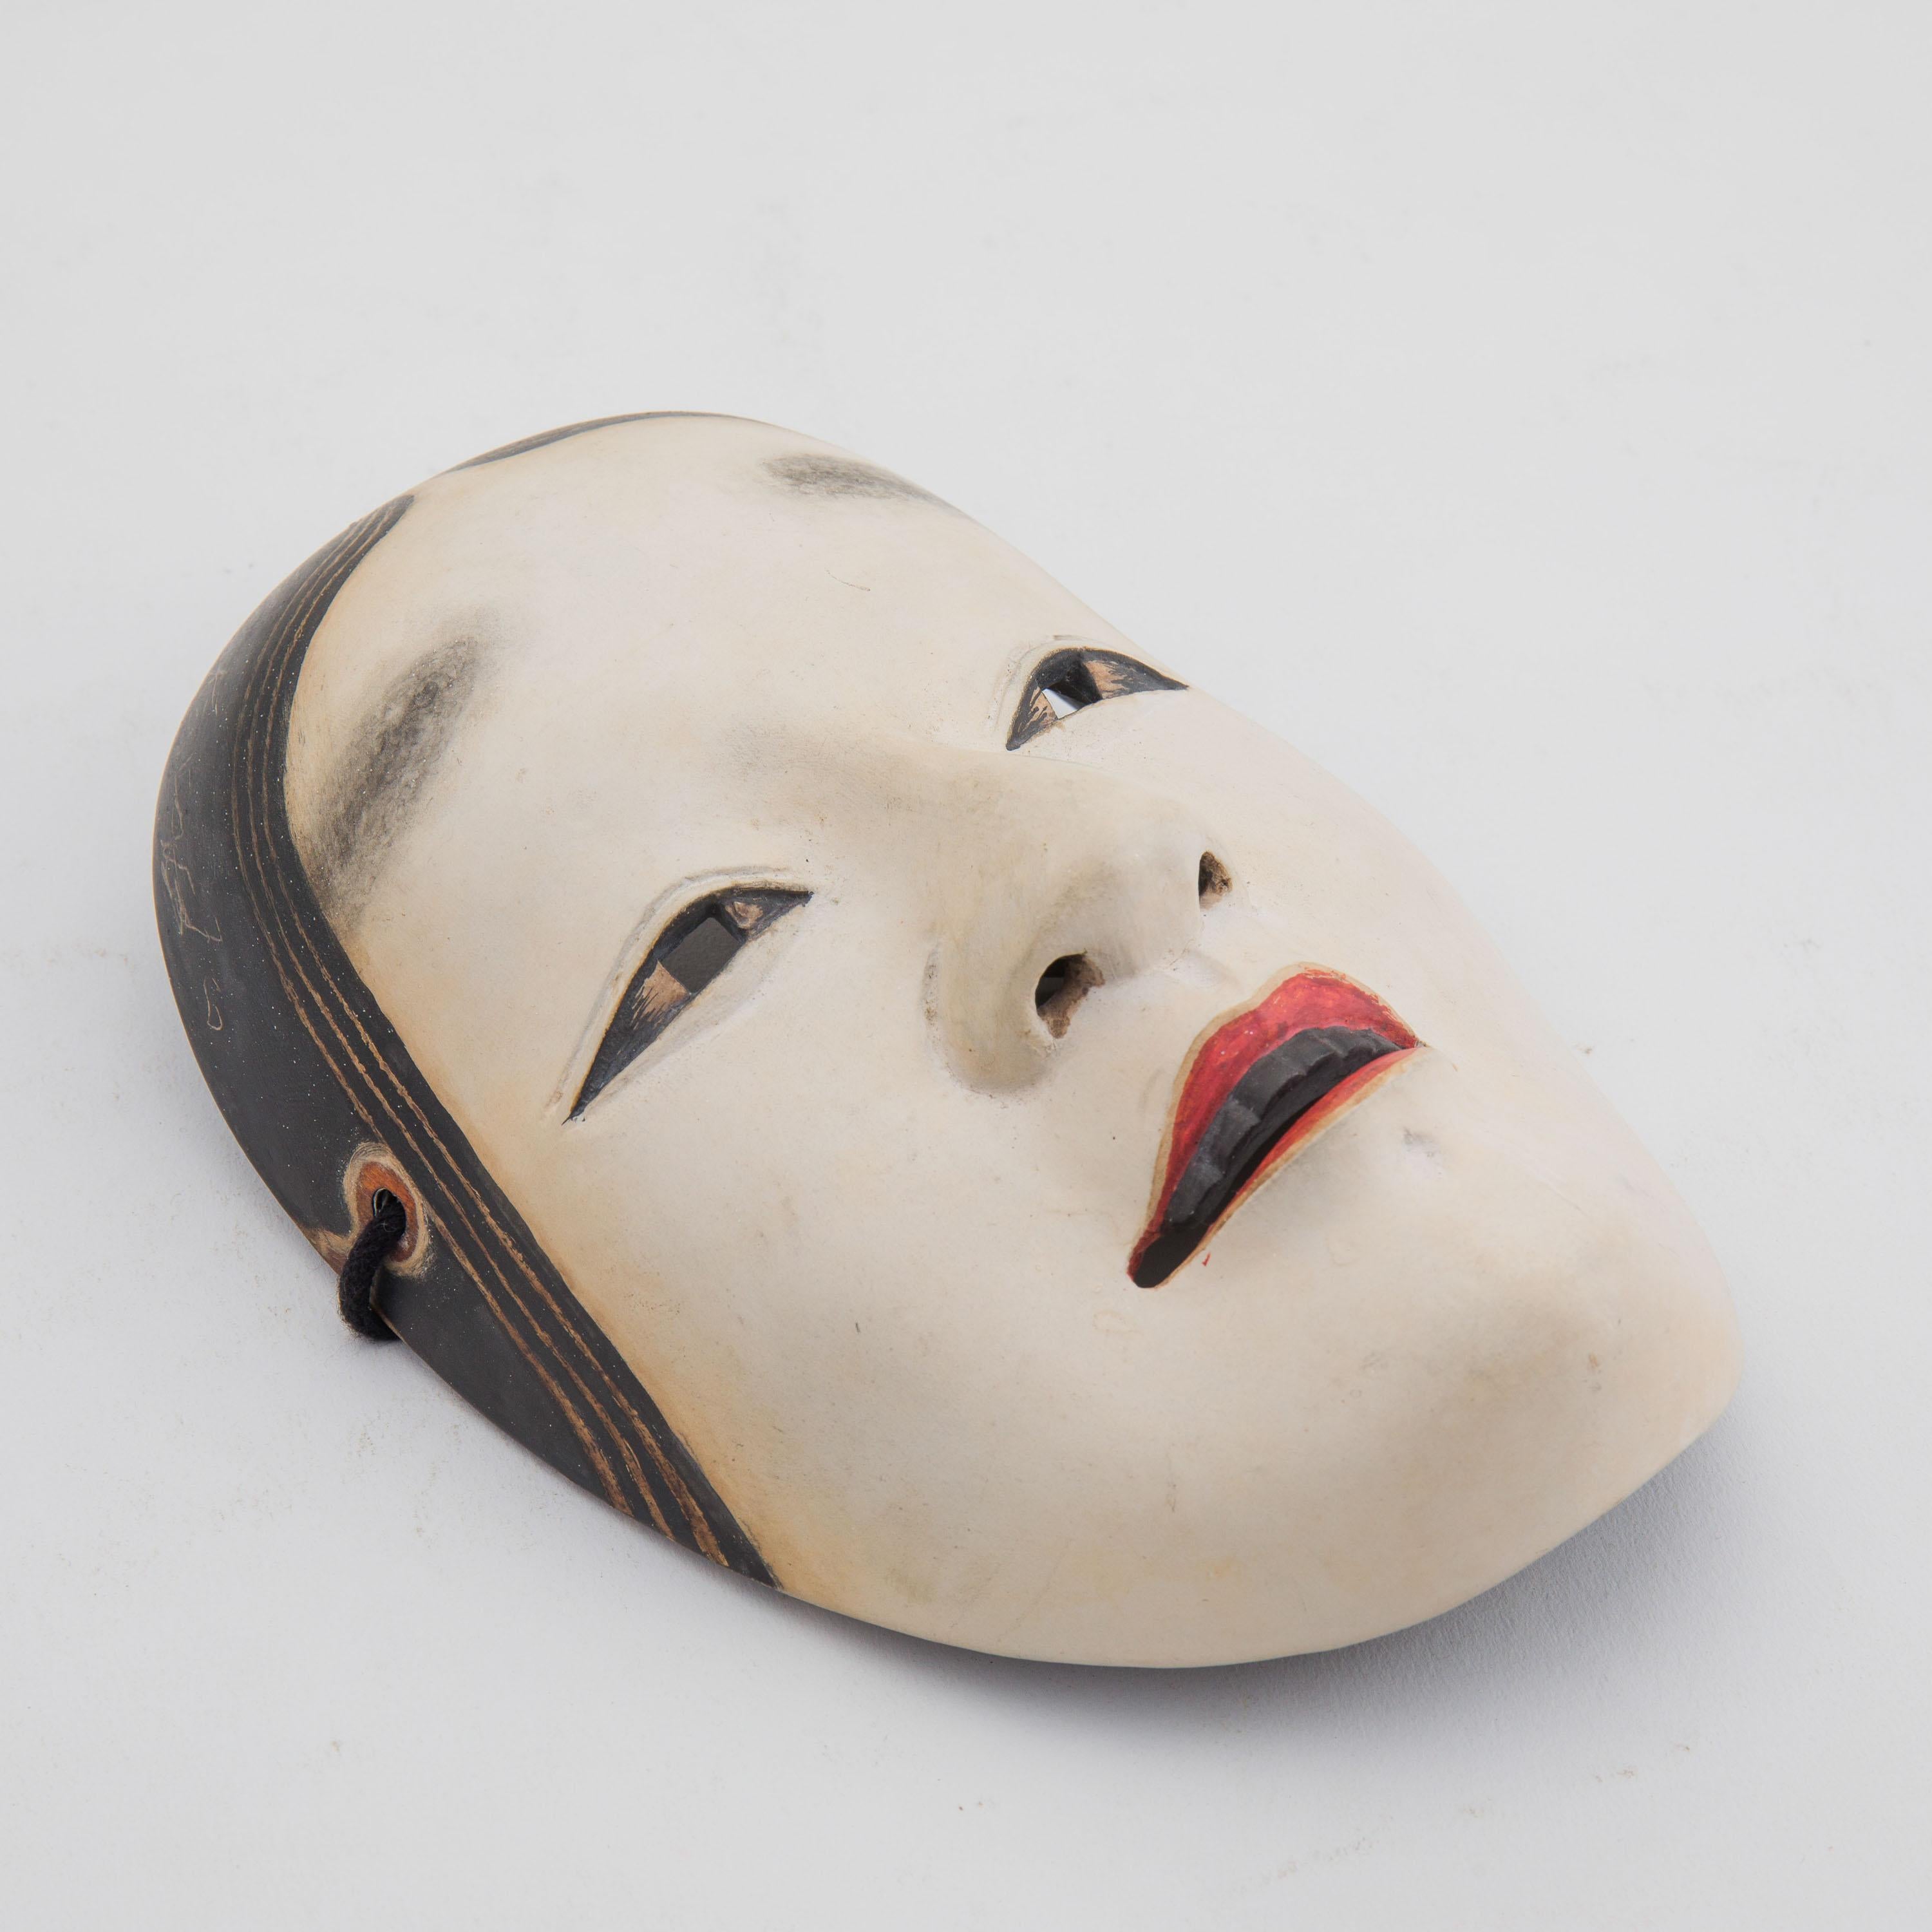 An antique hand-carved and hand-painted Japanese Noh theatre mask, depicting a young female character (onna men). Noh masks have been described as being like 